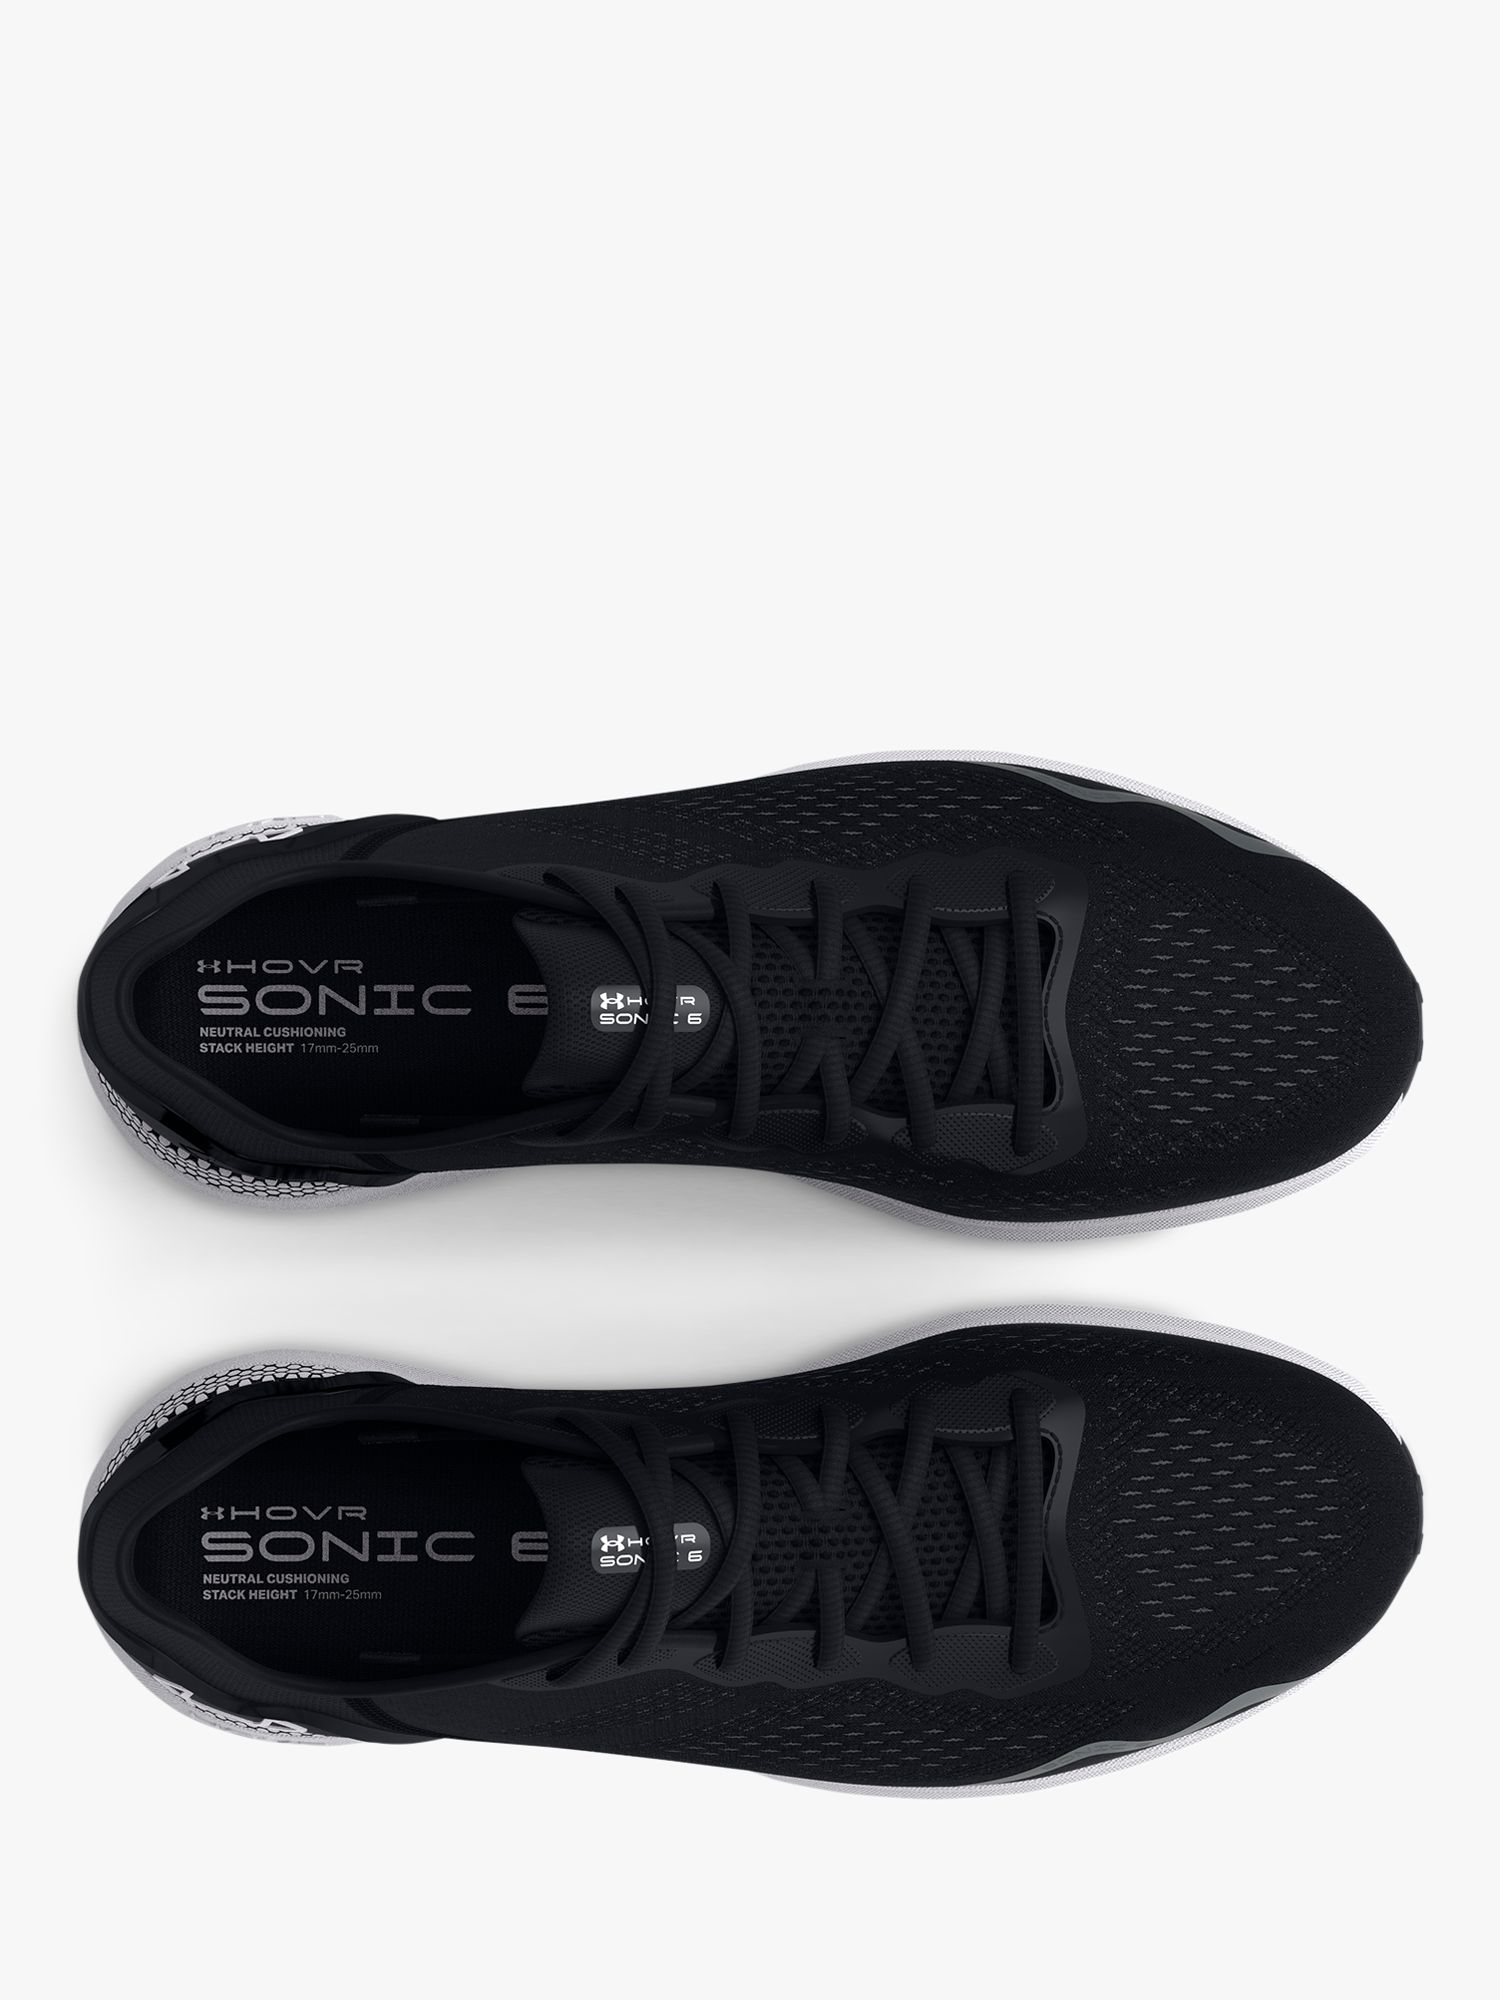 Buy Under Armour HOVR Sonic 6 Men's Running Shoes Online at johnlewis.com